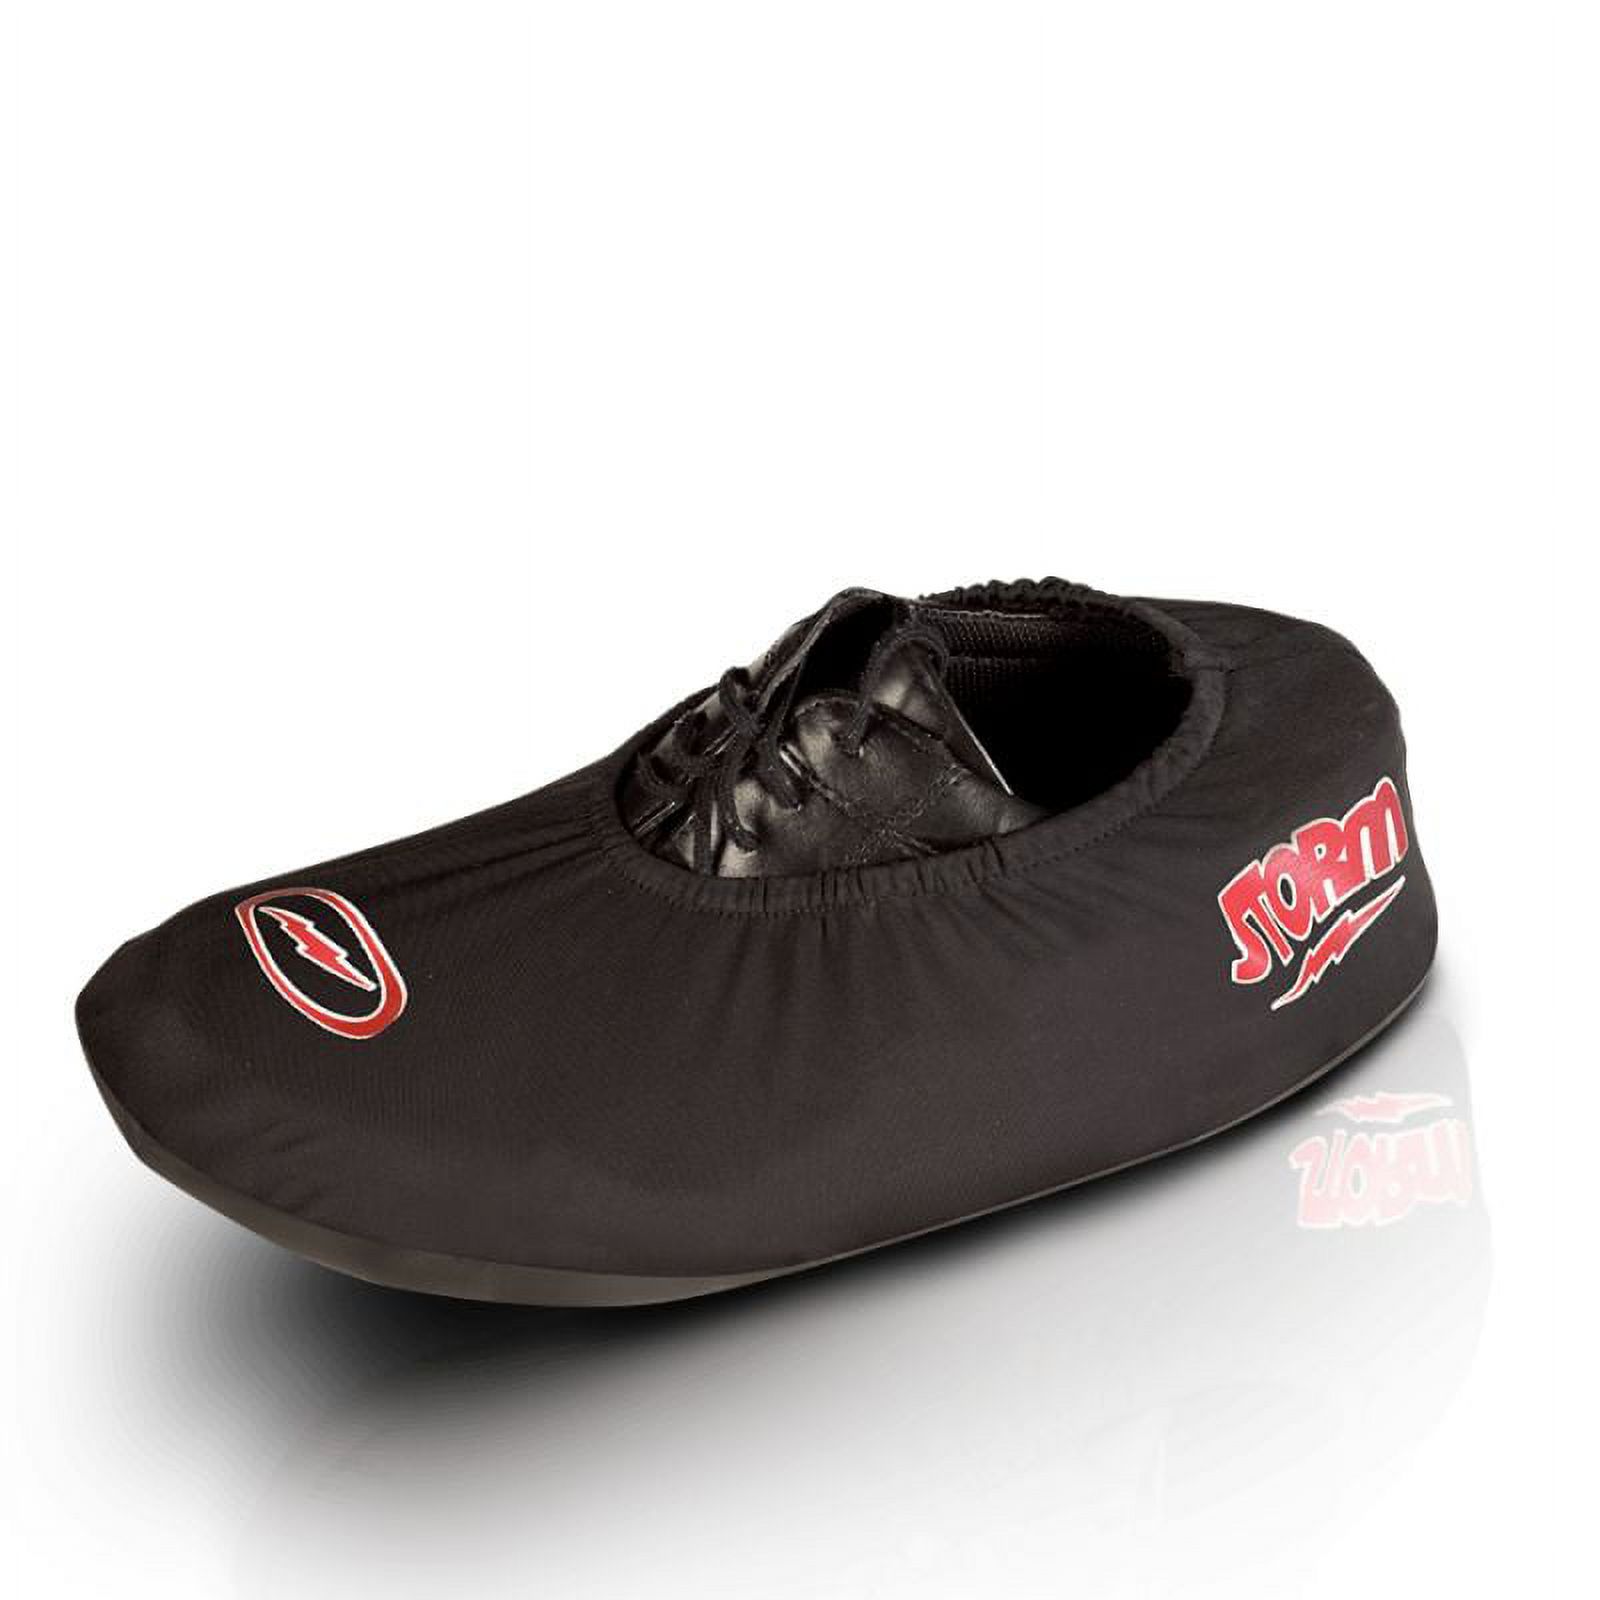 Storm Men's 1 Bowling Shoe Cover, Black/Red Logo - image 1 of 1